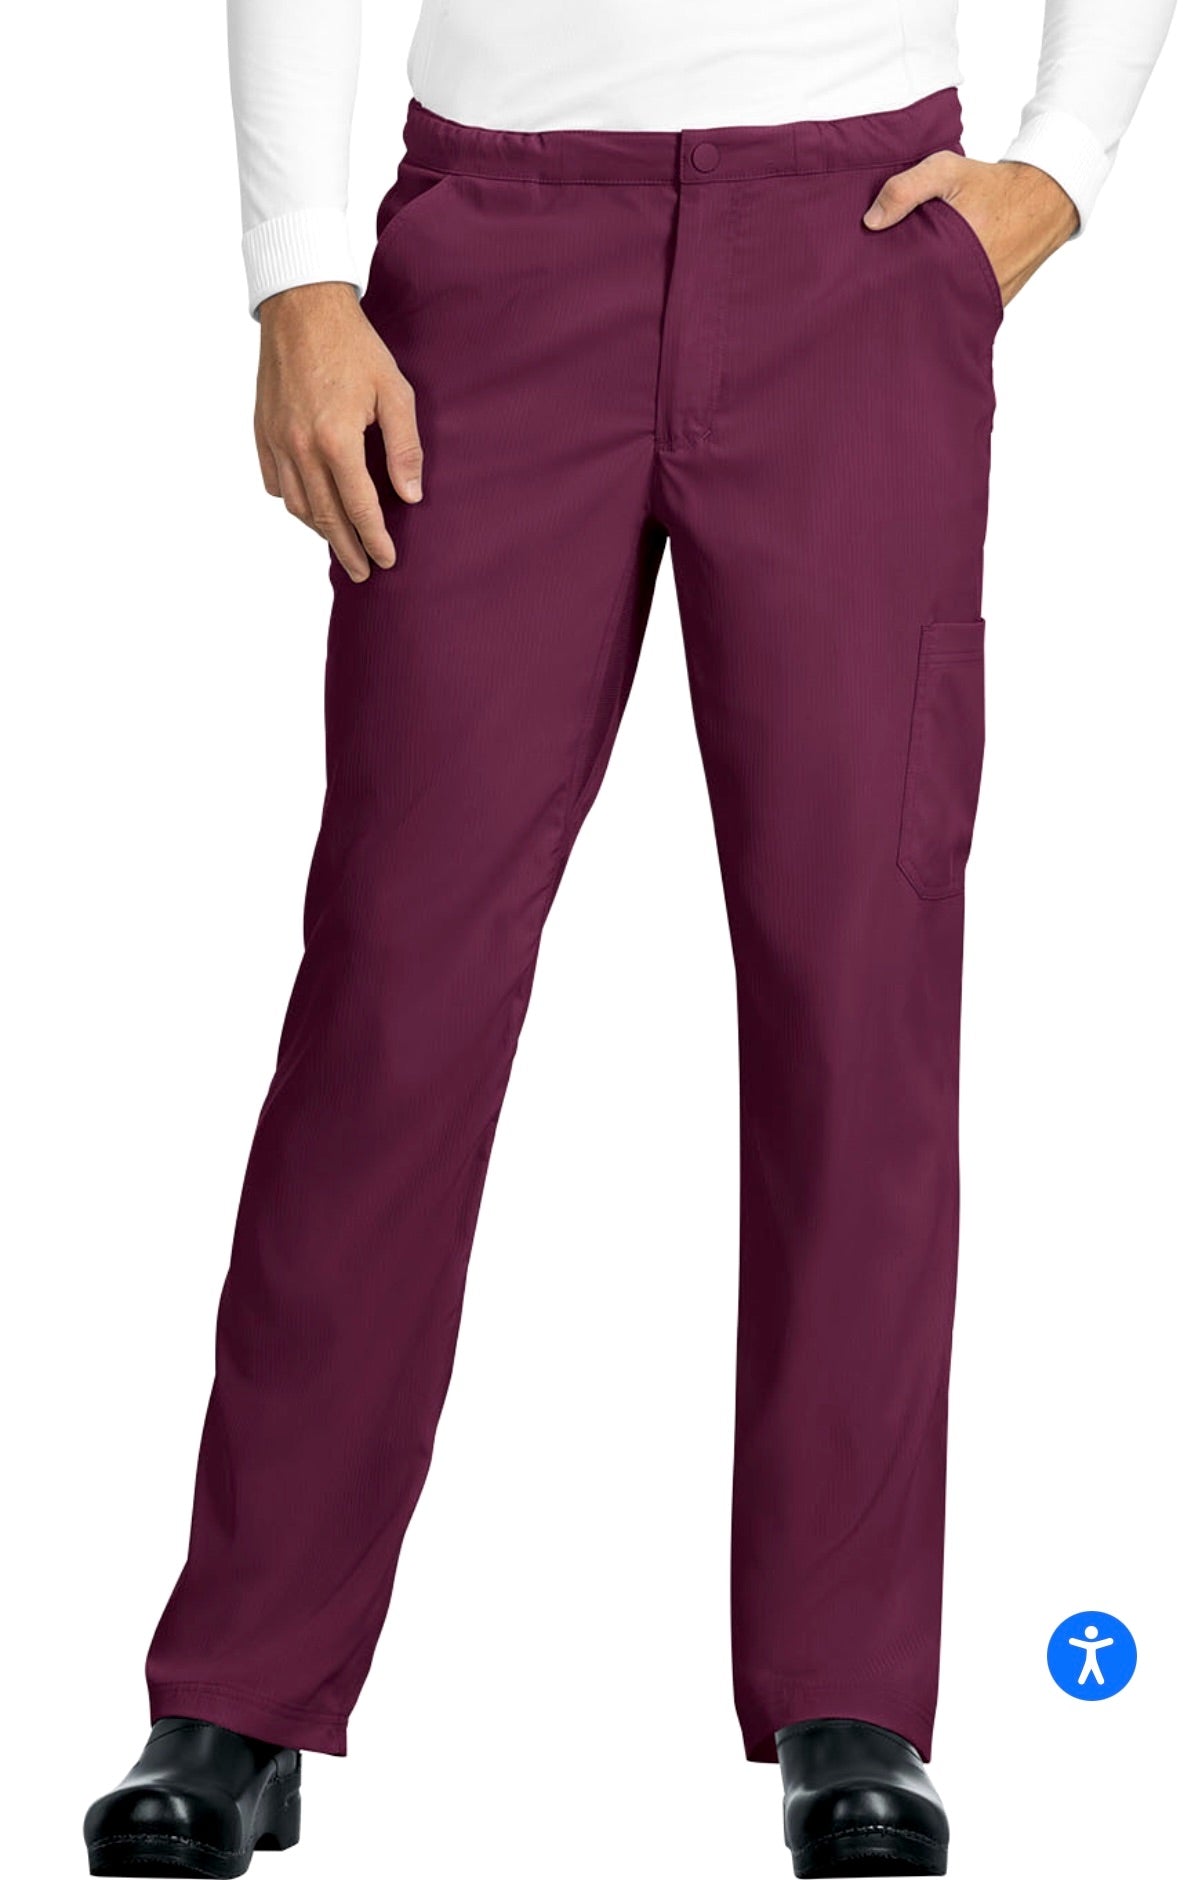 Discovery Men’s Pant